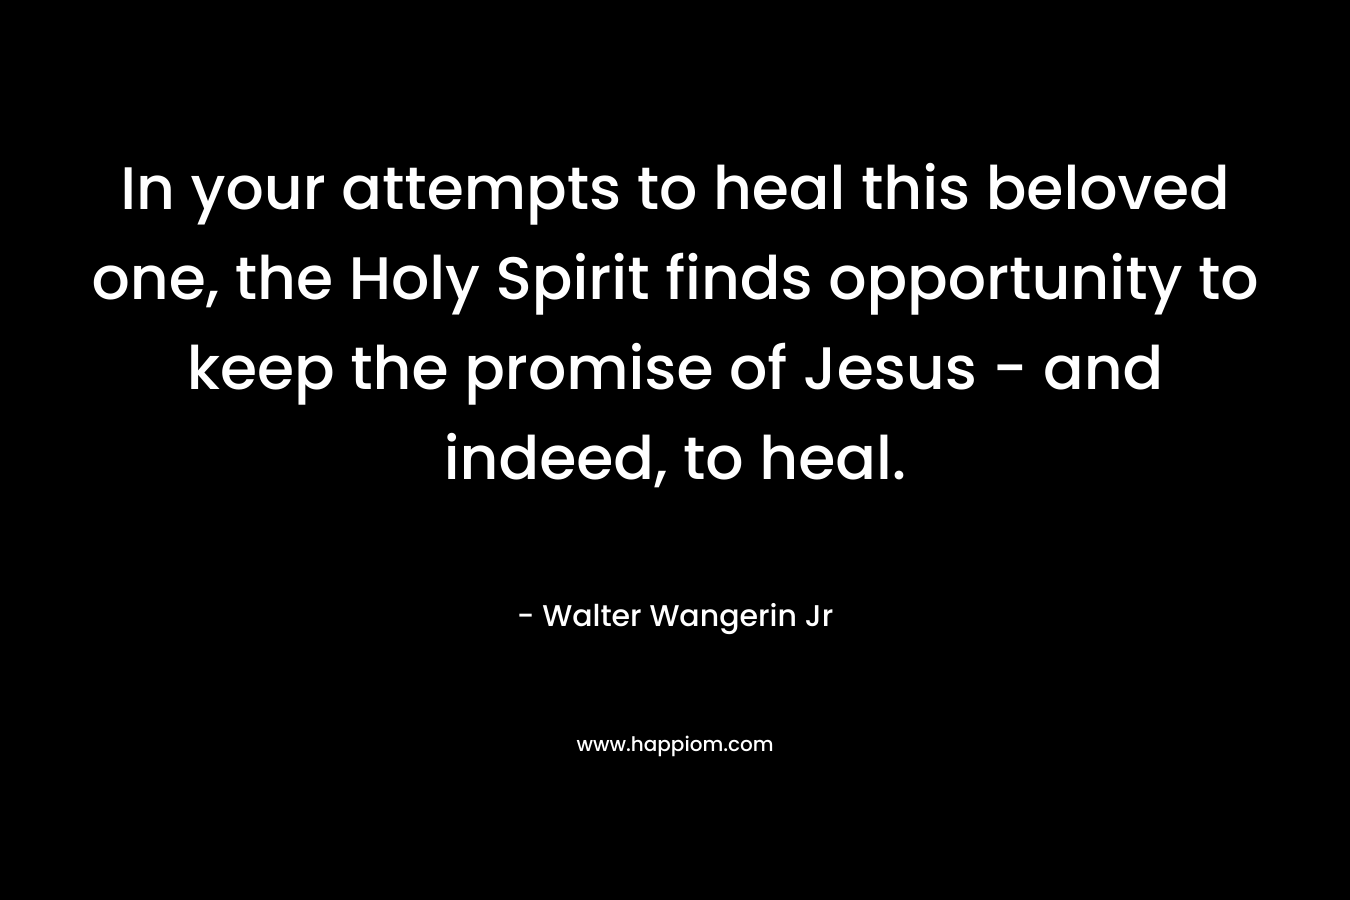 In your attempts to heal this beloved one, the Holy Spirit finds opportunity to keep the promise of Jesus - and indeed, to heal.